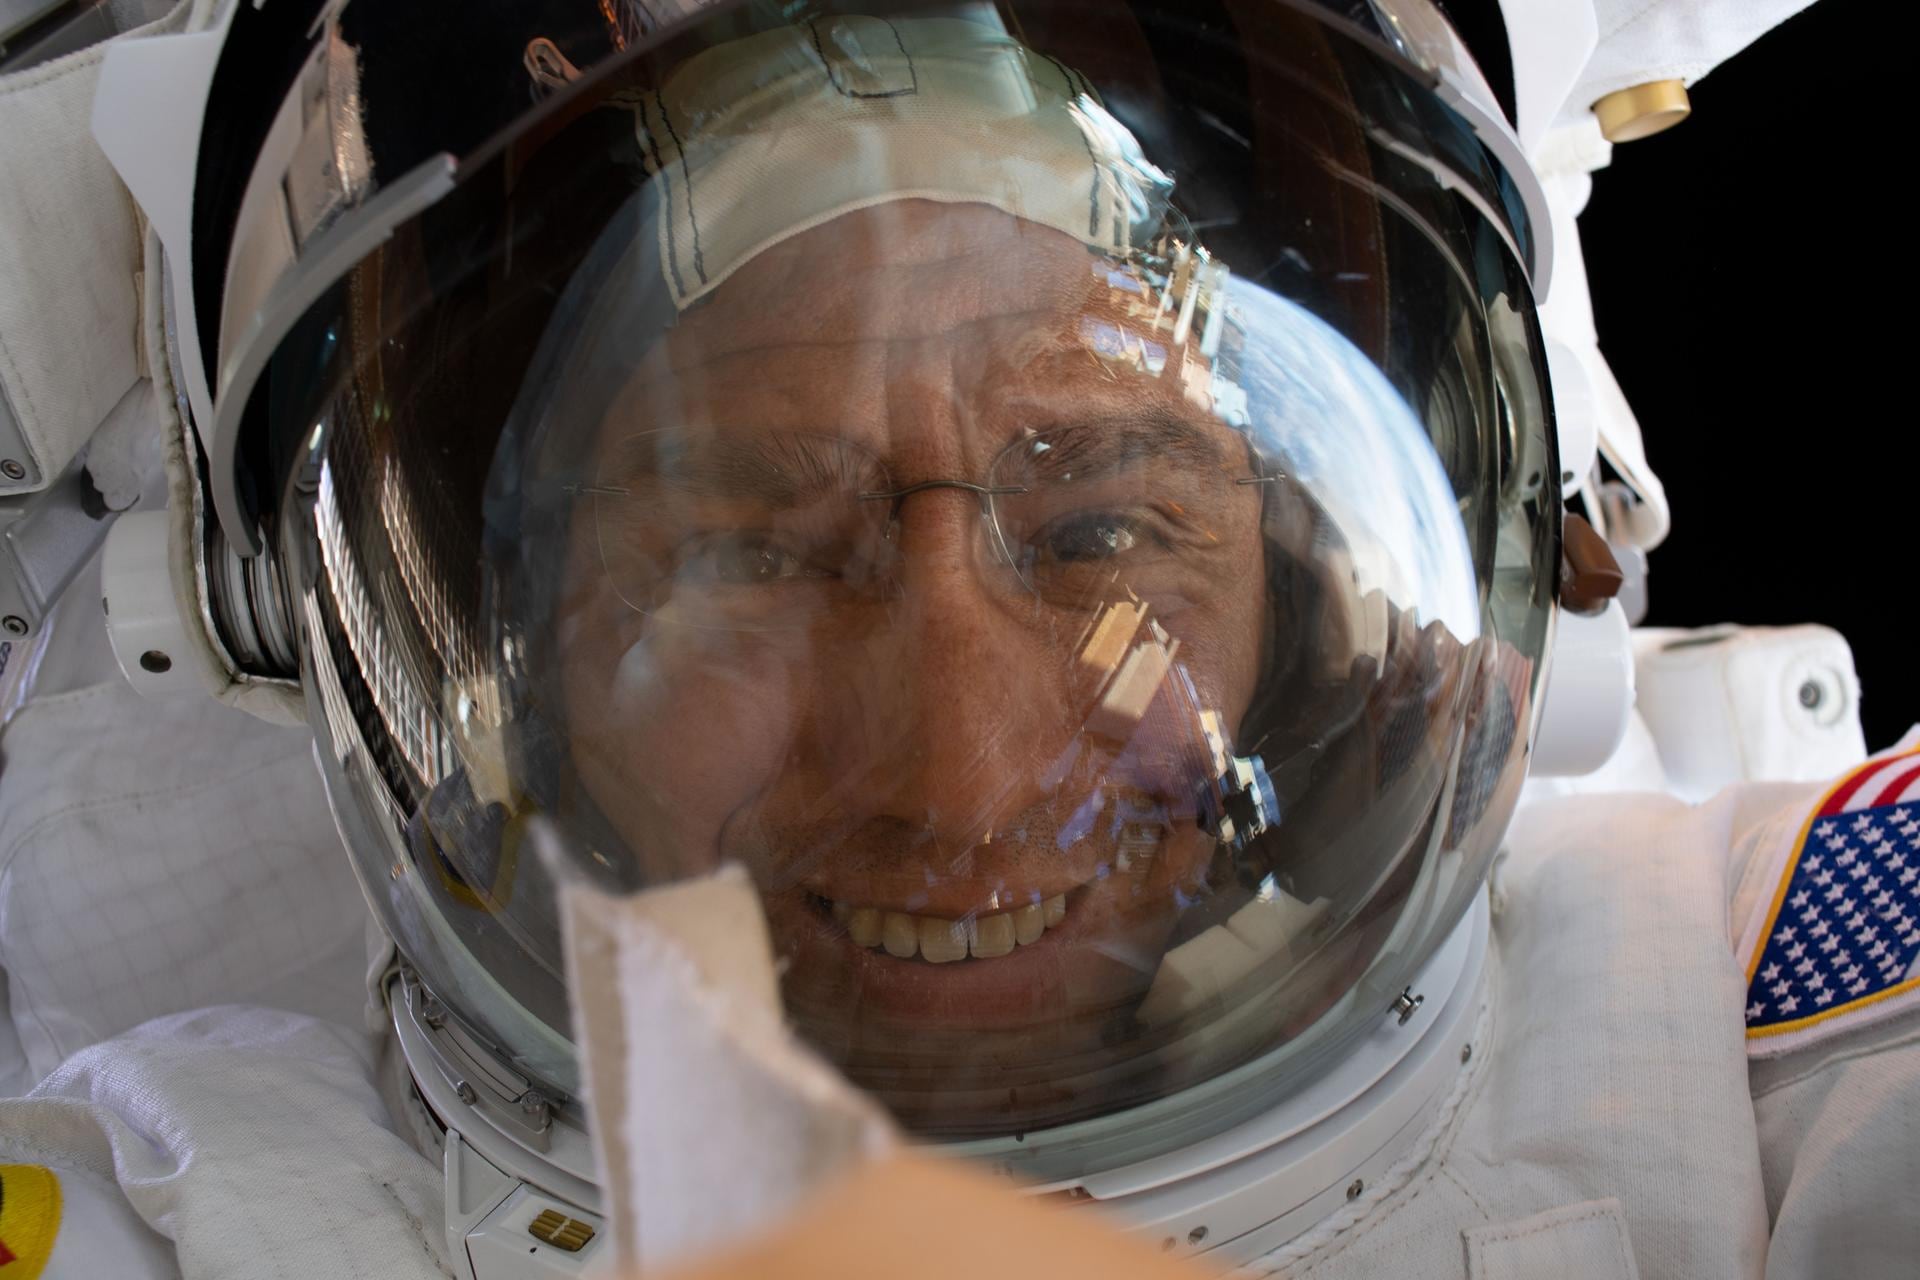 Frank Rubio during a spacewalk in his Extravehicular Mobility Unit, on November 15, 2022.